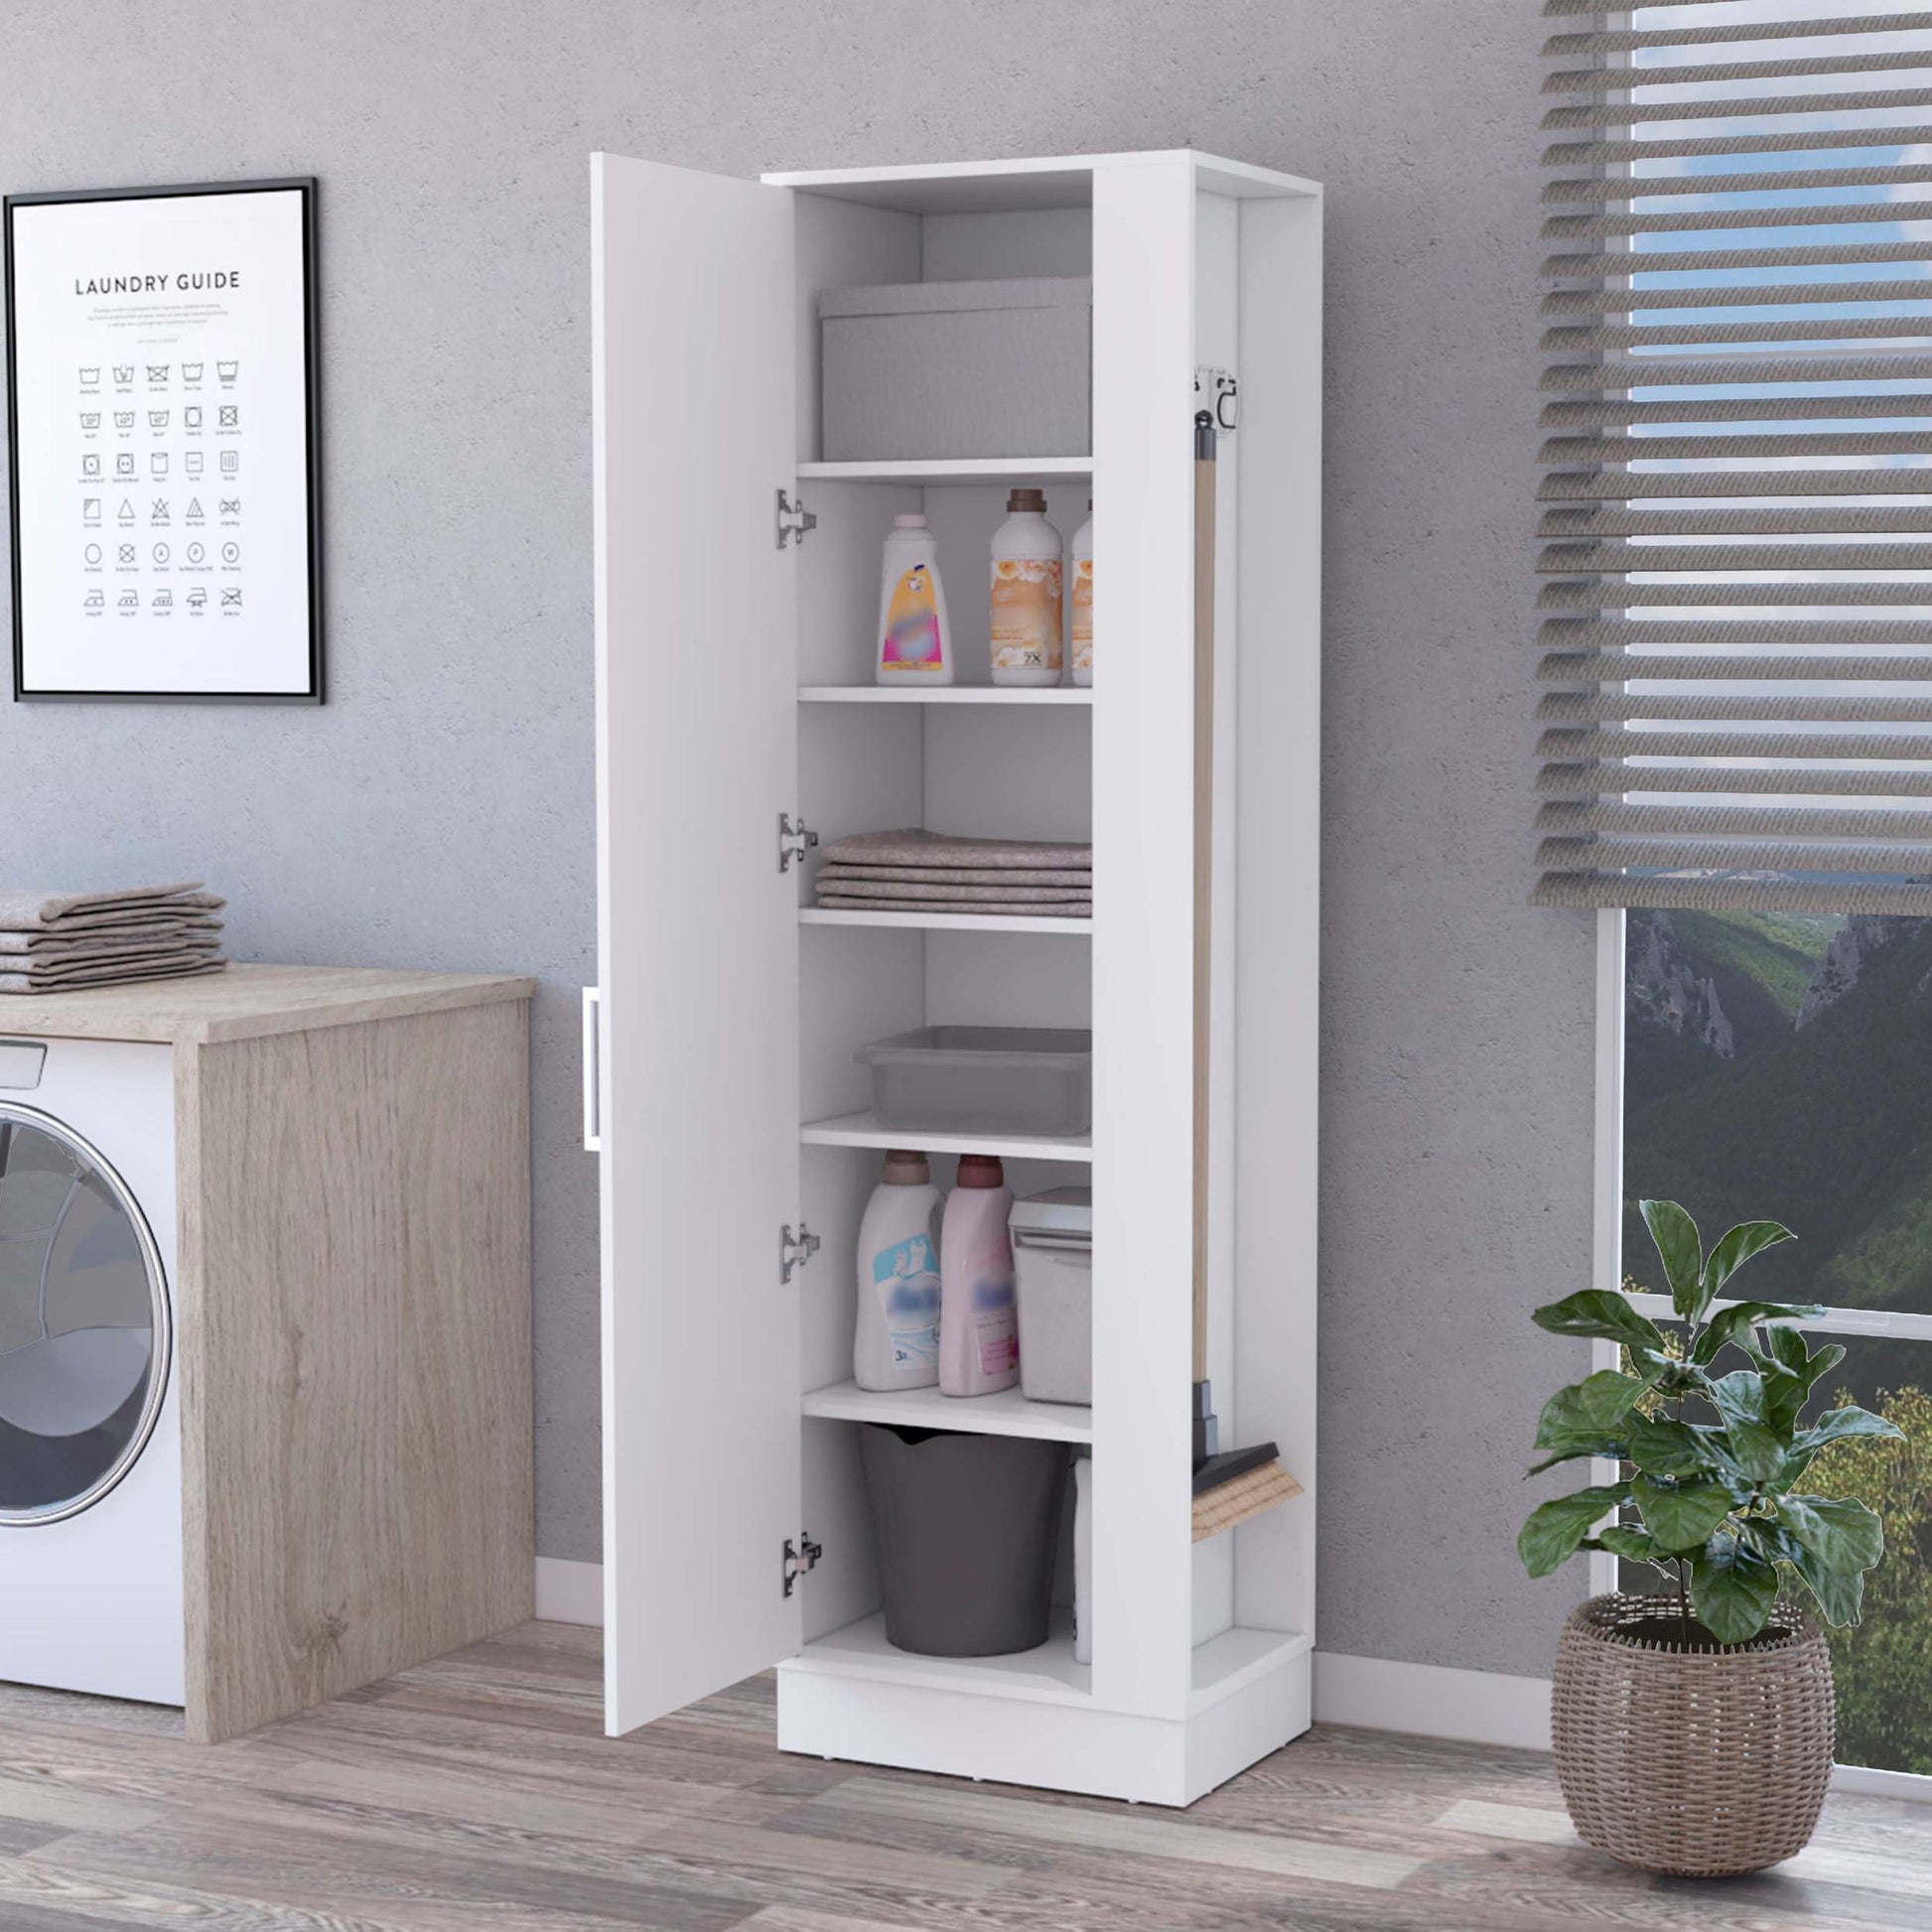 Clarno Tall Storage Cabinet, Single Door With